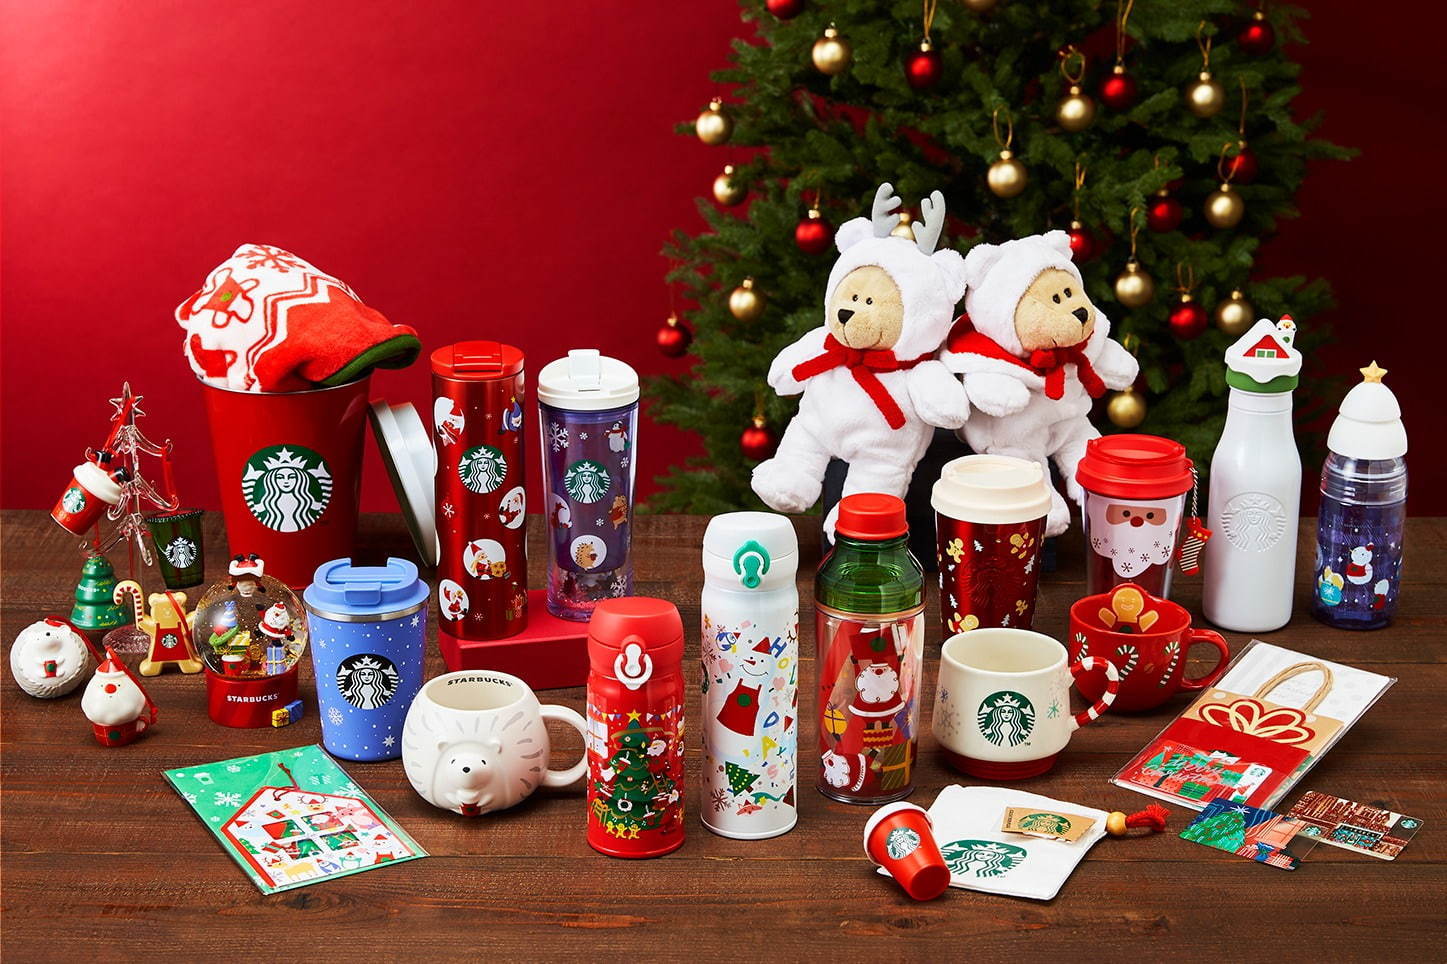 Starbucks Christmas Tumblers and Other Merchandise